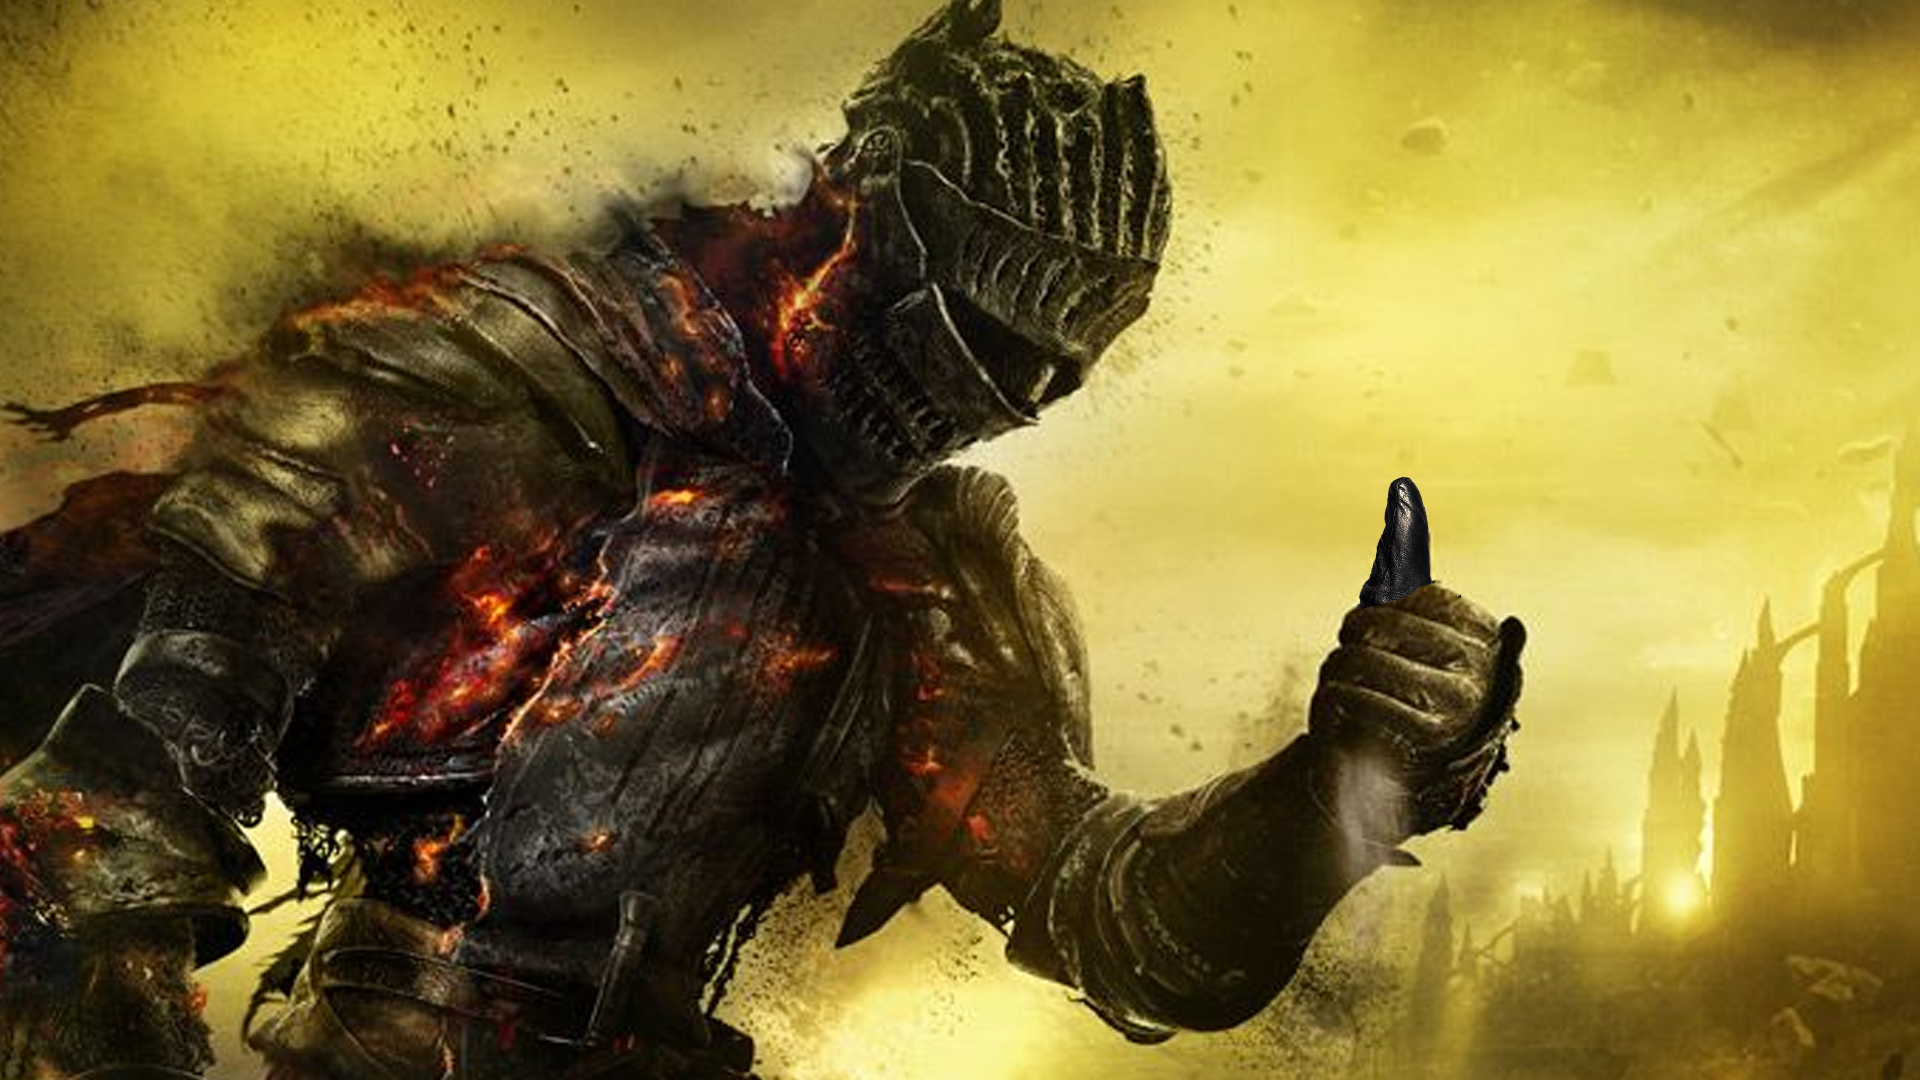 It looks like multiplayer is coming back to Dark Souls III on PC soon